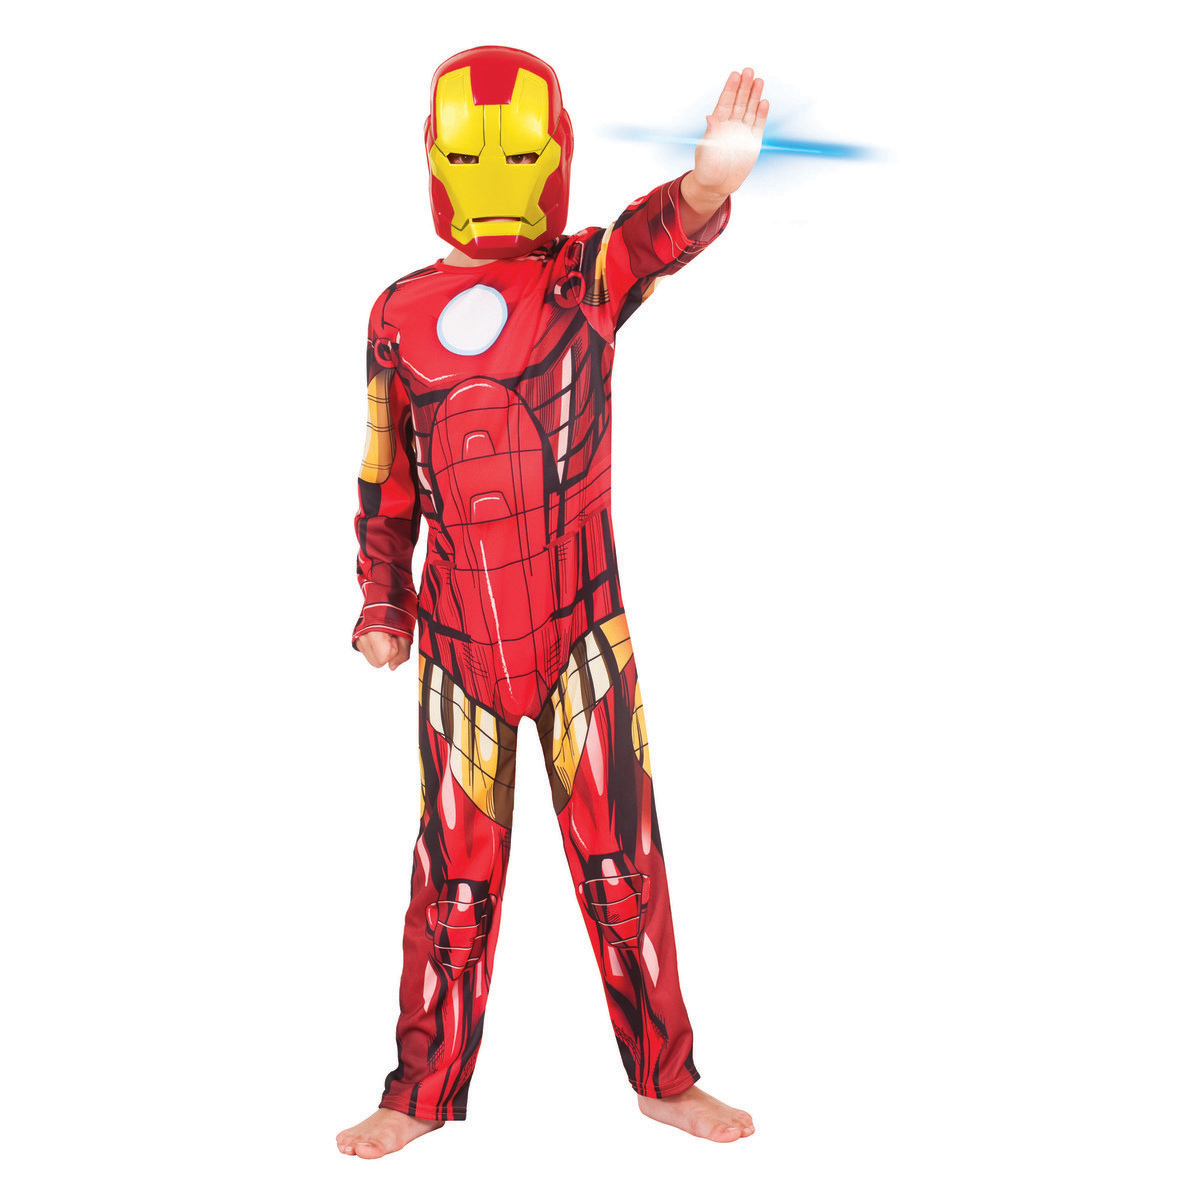 Ironman Costume - Ages 6-8, Assorted | Kmart